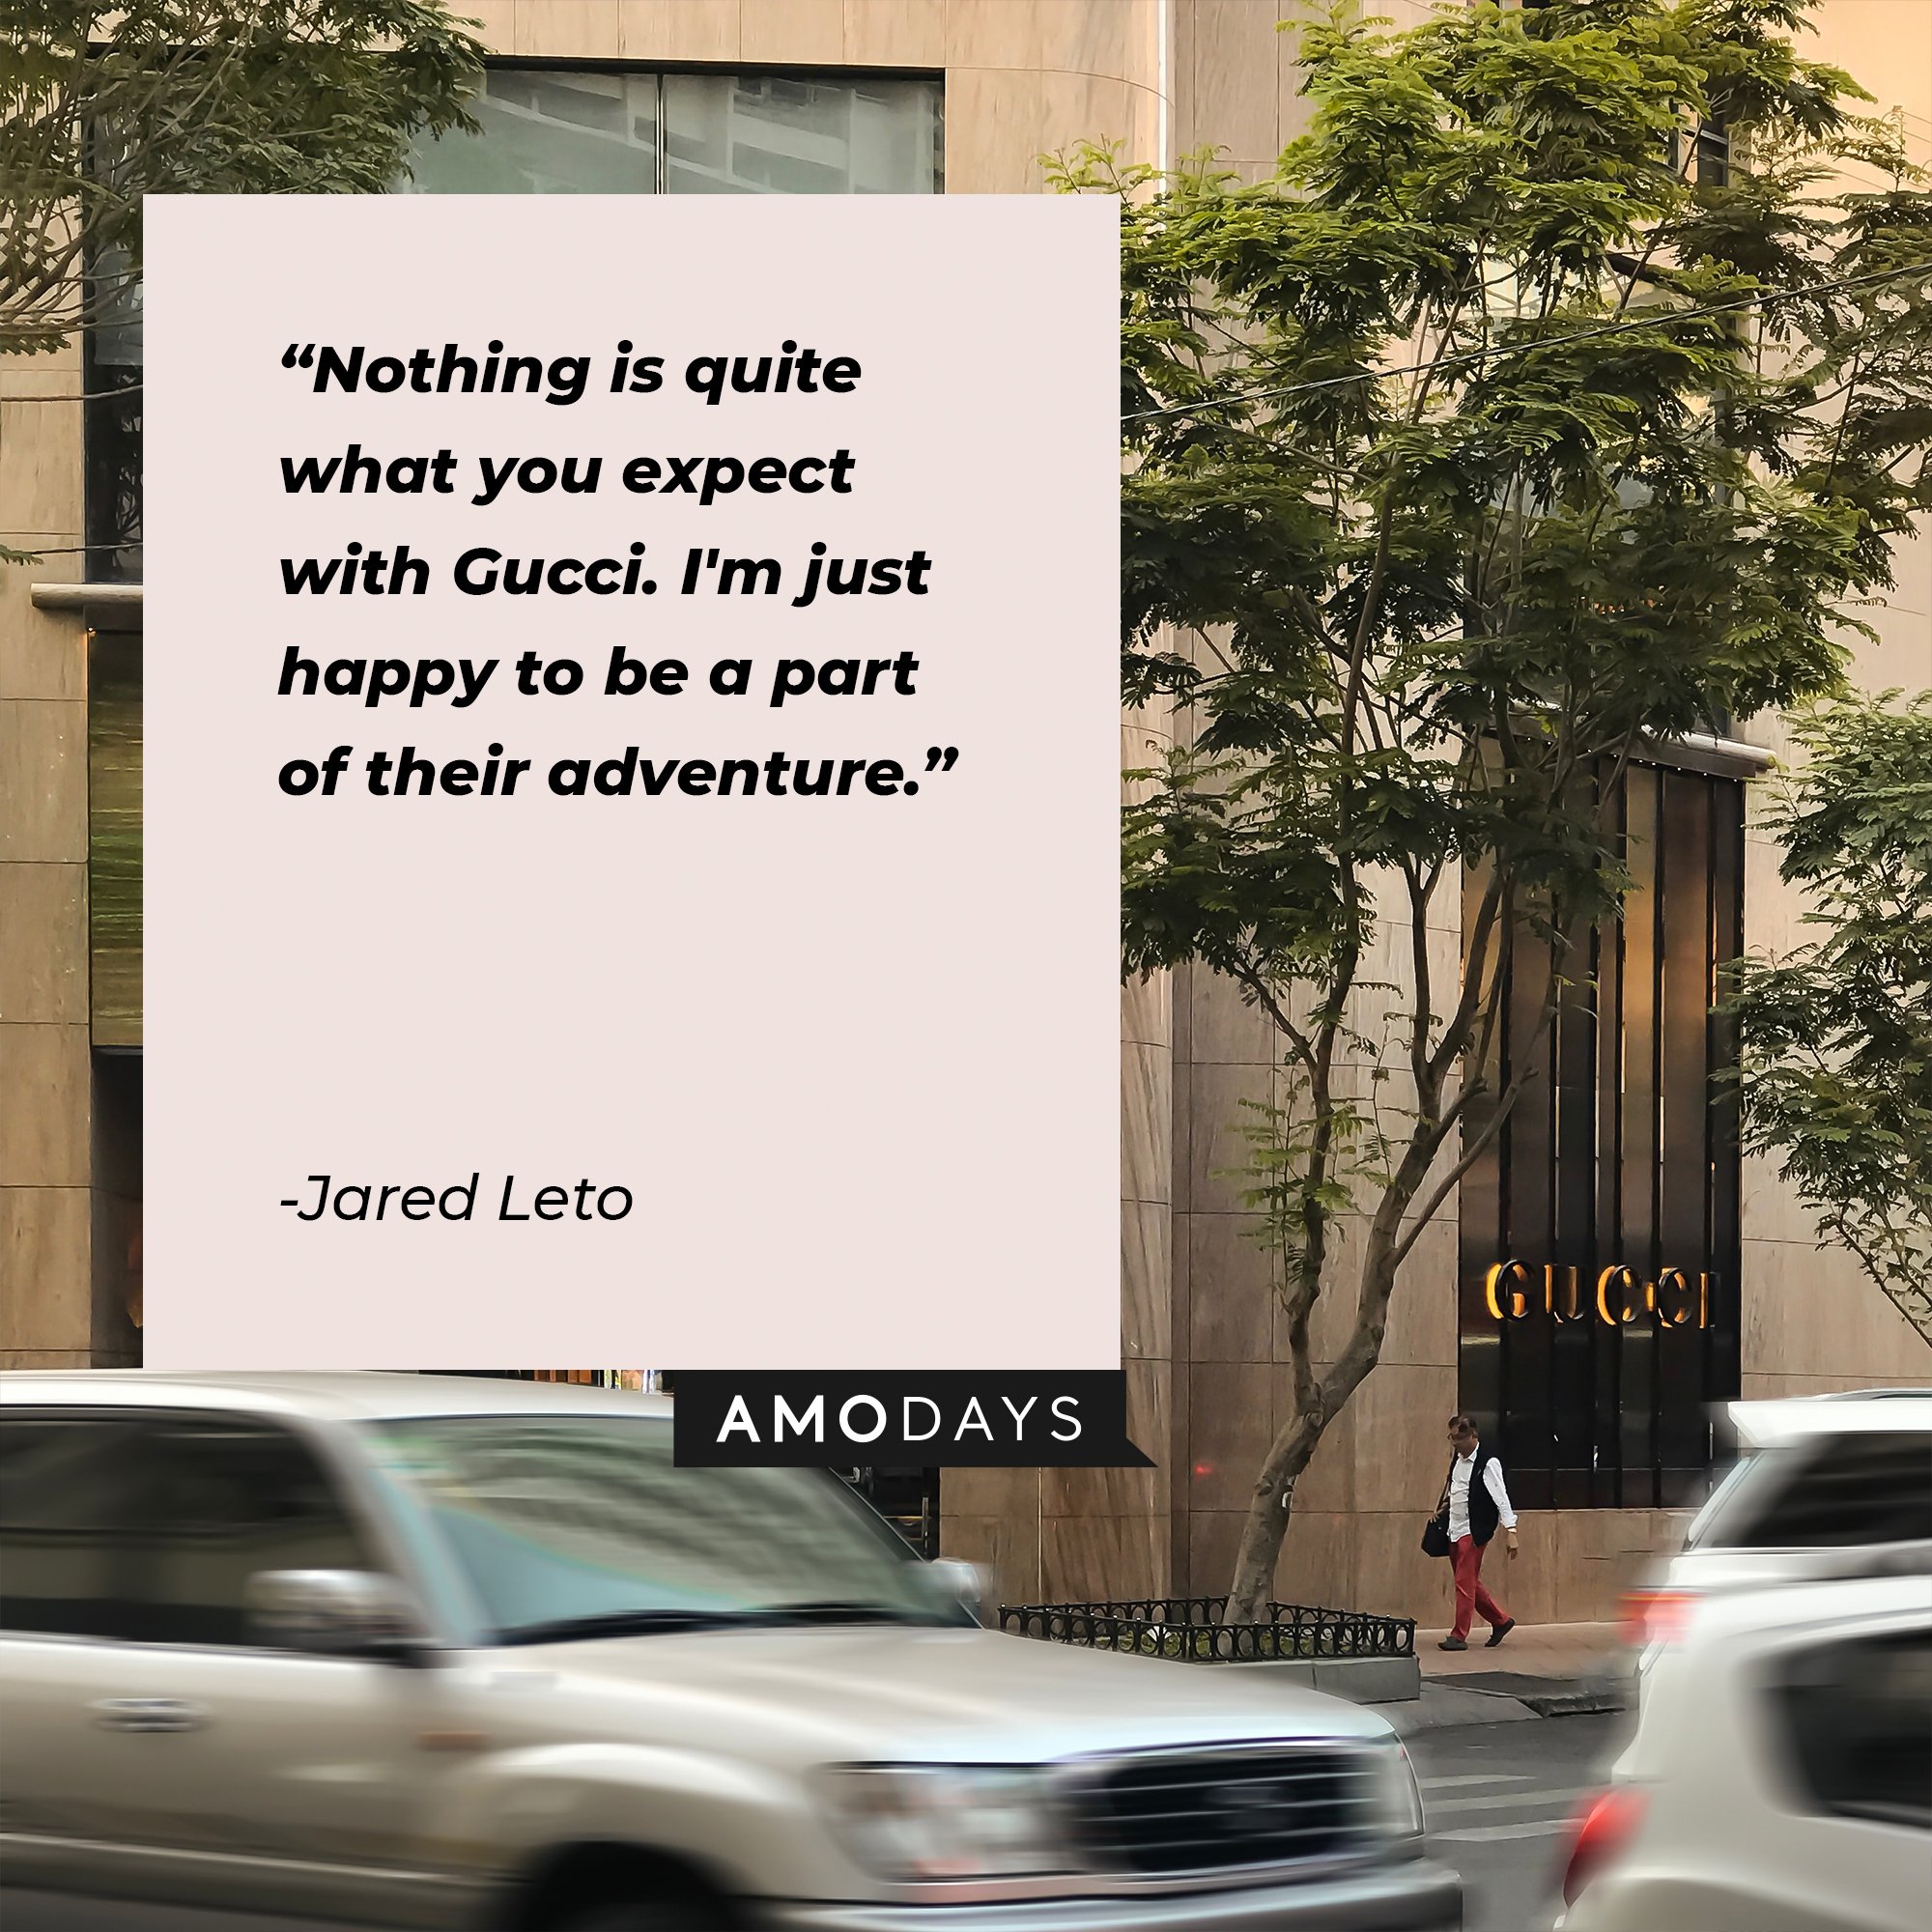 Jared Leto's quote "Nothing is quite what you expect with Gucci. I'm just happy to be a part of their adventure." | Source: Unsplash.com